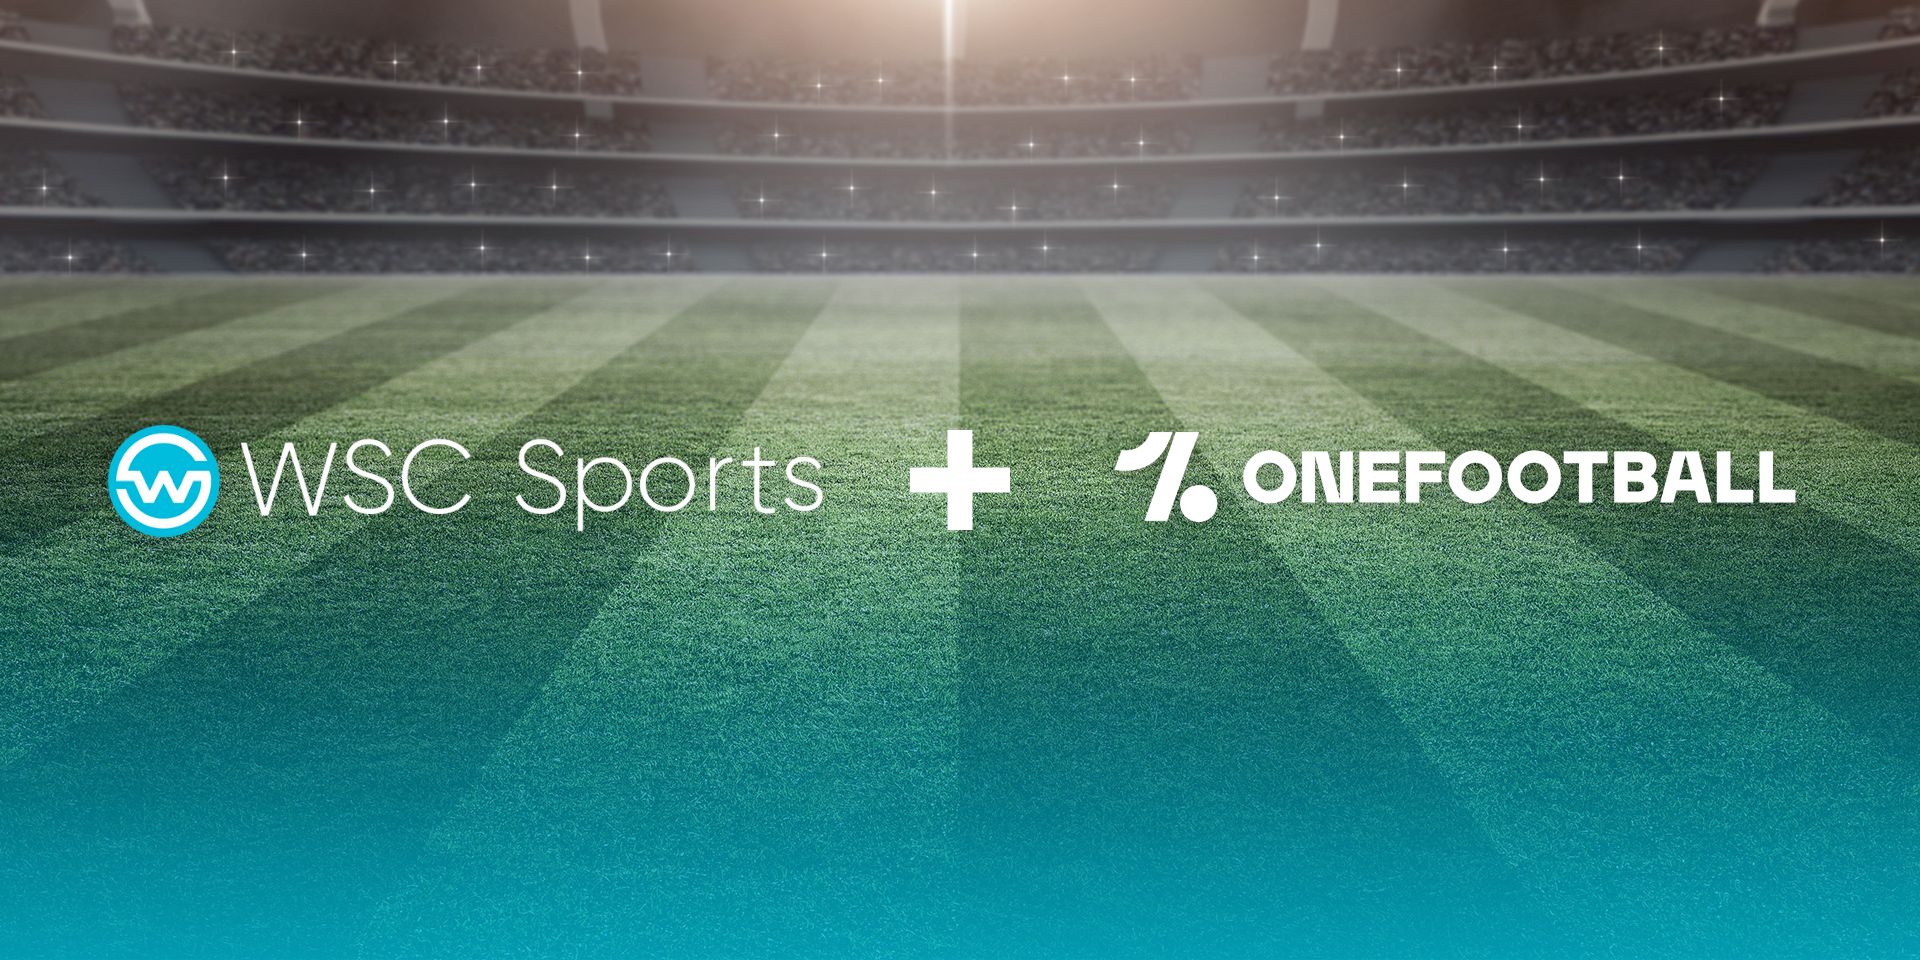 onefootball & wsc sports join forces to enhance the digital fan experience!